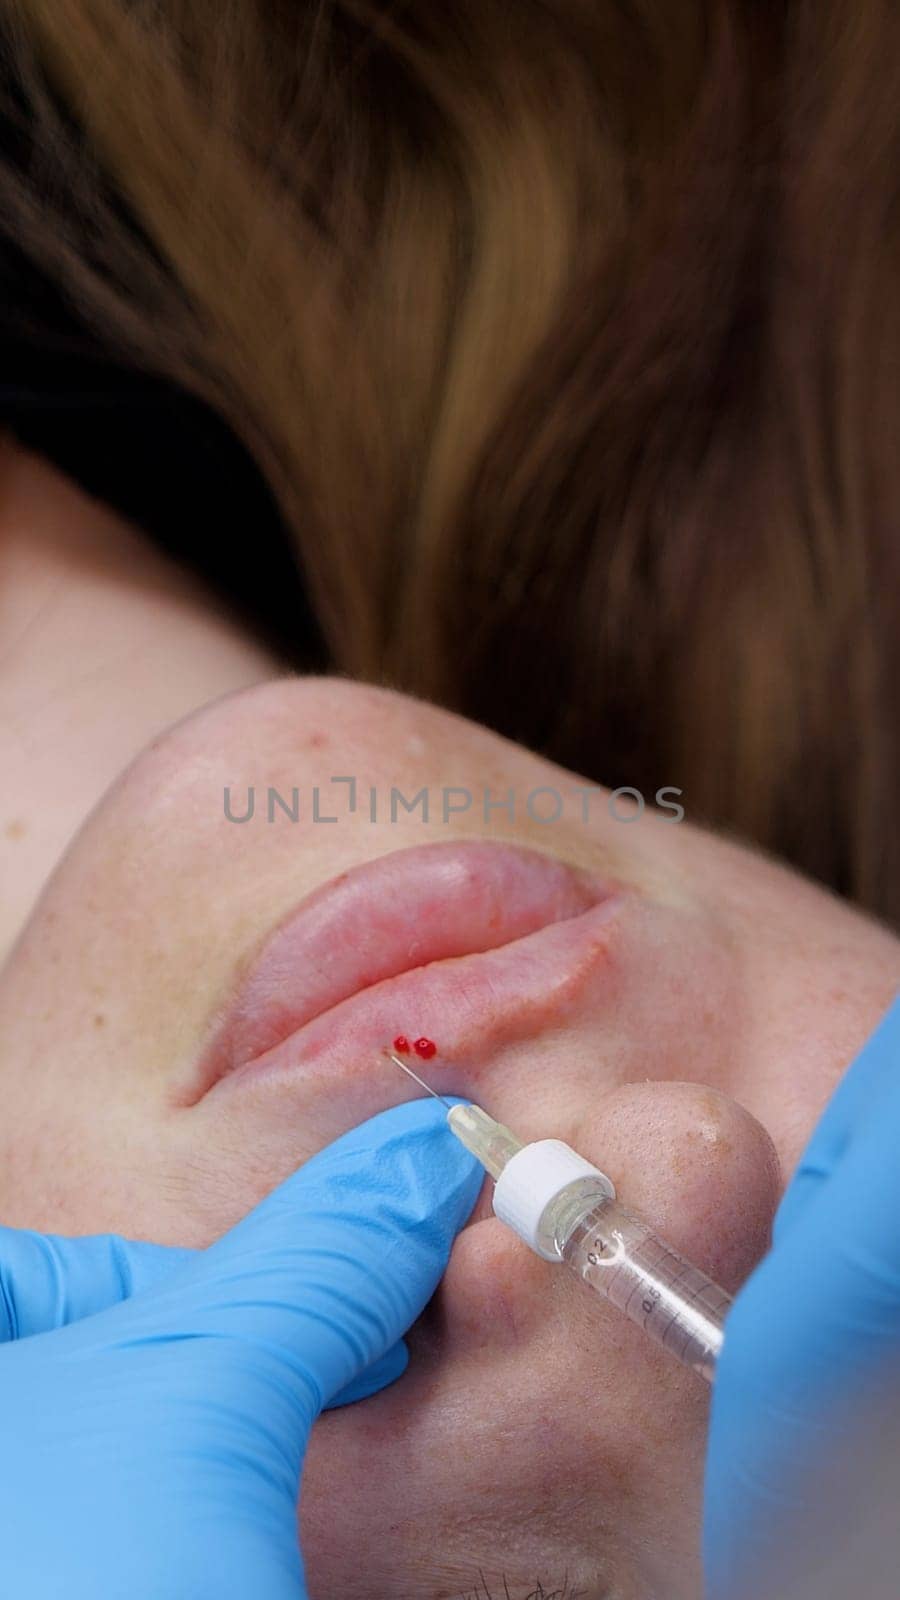 close-up, female face. Surgeon, in medical gloves, carefully and slowly injects hyaluronic acid into woman's lips with a syringe. lip augmentation procedure. beauty injections. Plastic surgery. by Skywayua